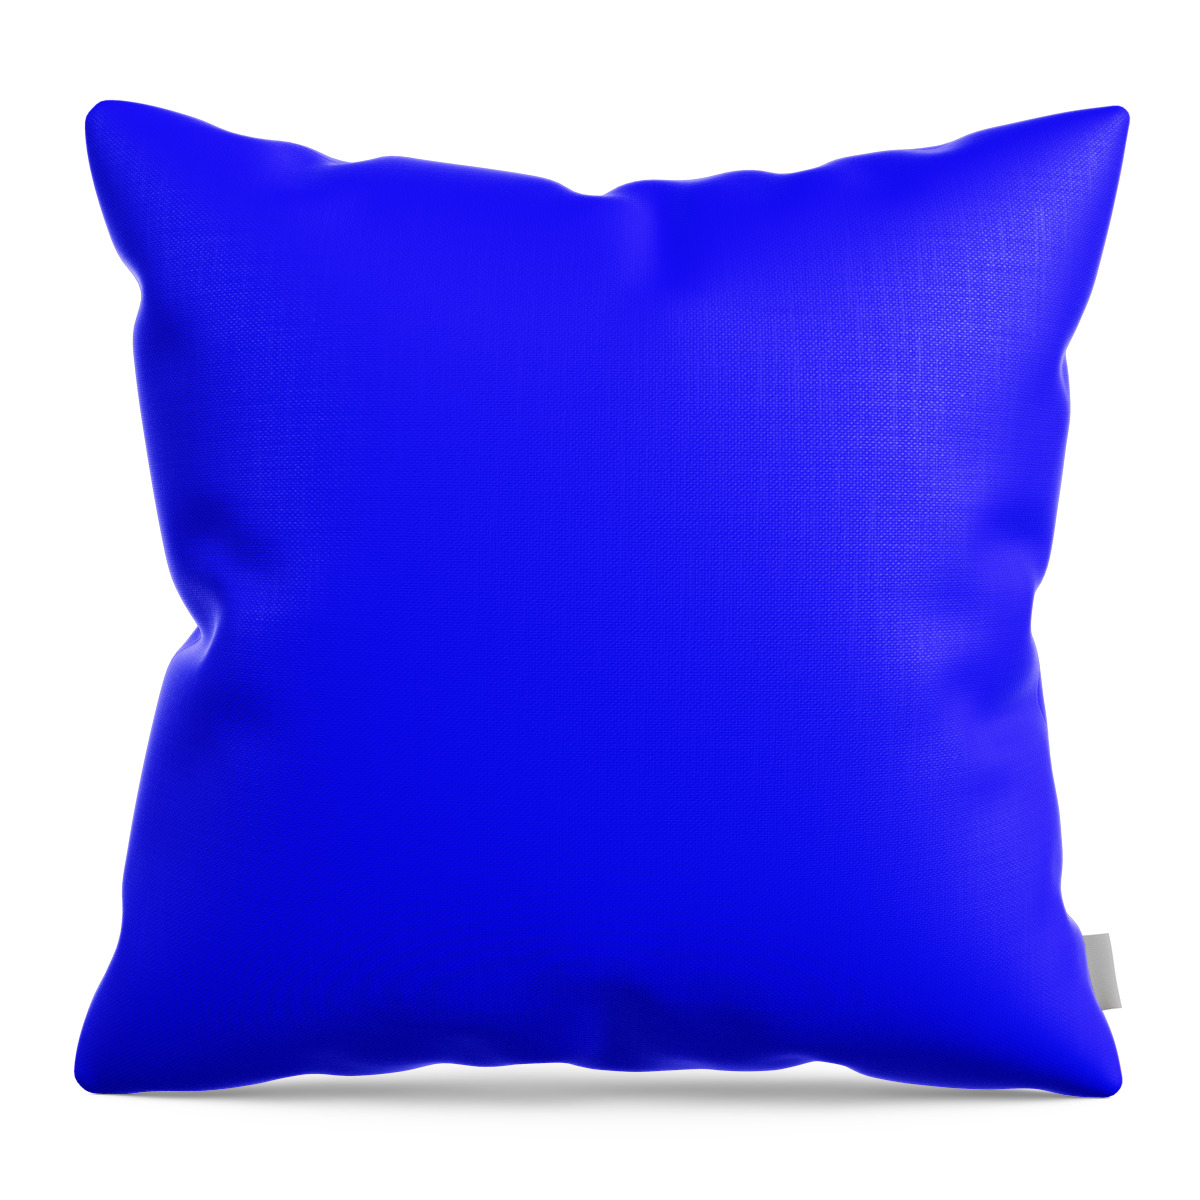 Blue Throw Pillow featuring the digital art Solid Blue Square by Bill Swartwout